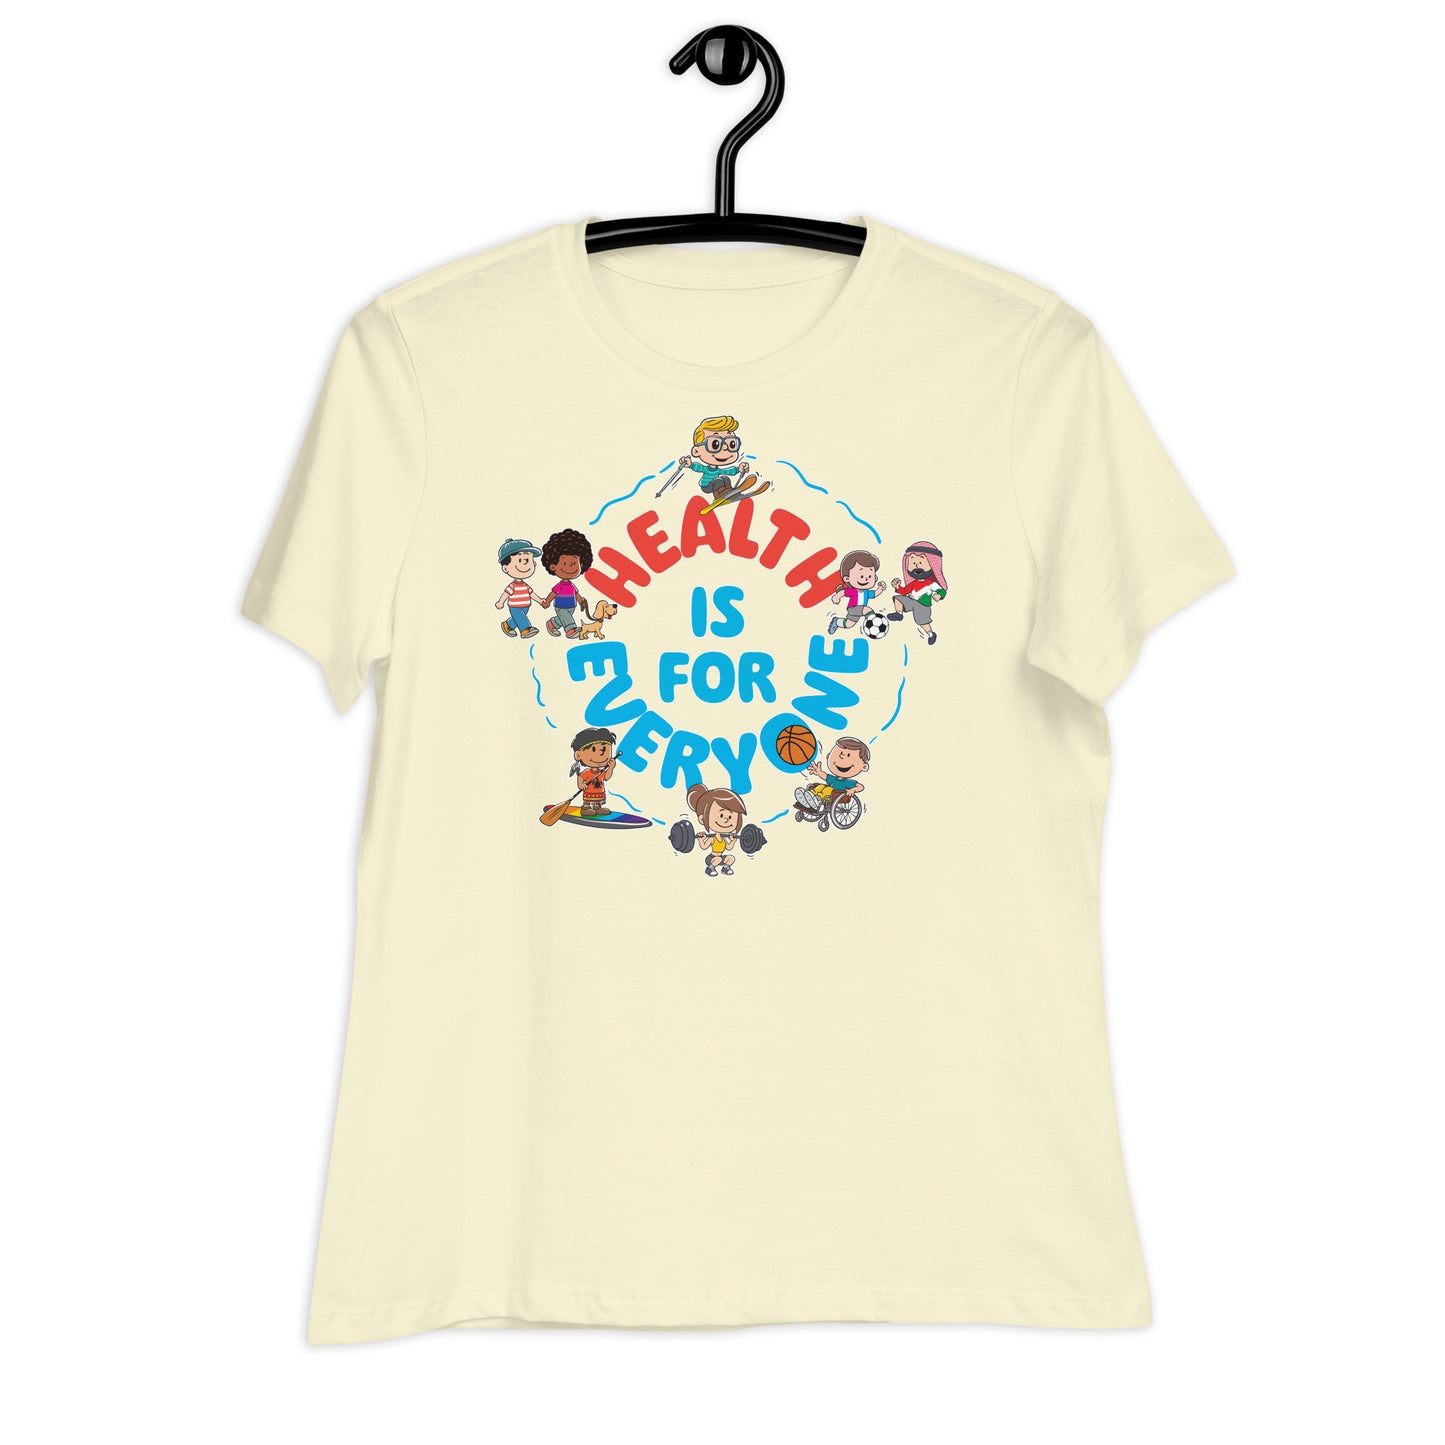 Health Is For Everyone Women's Relaxed T-Shirt